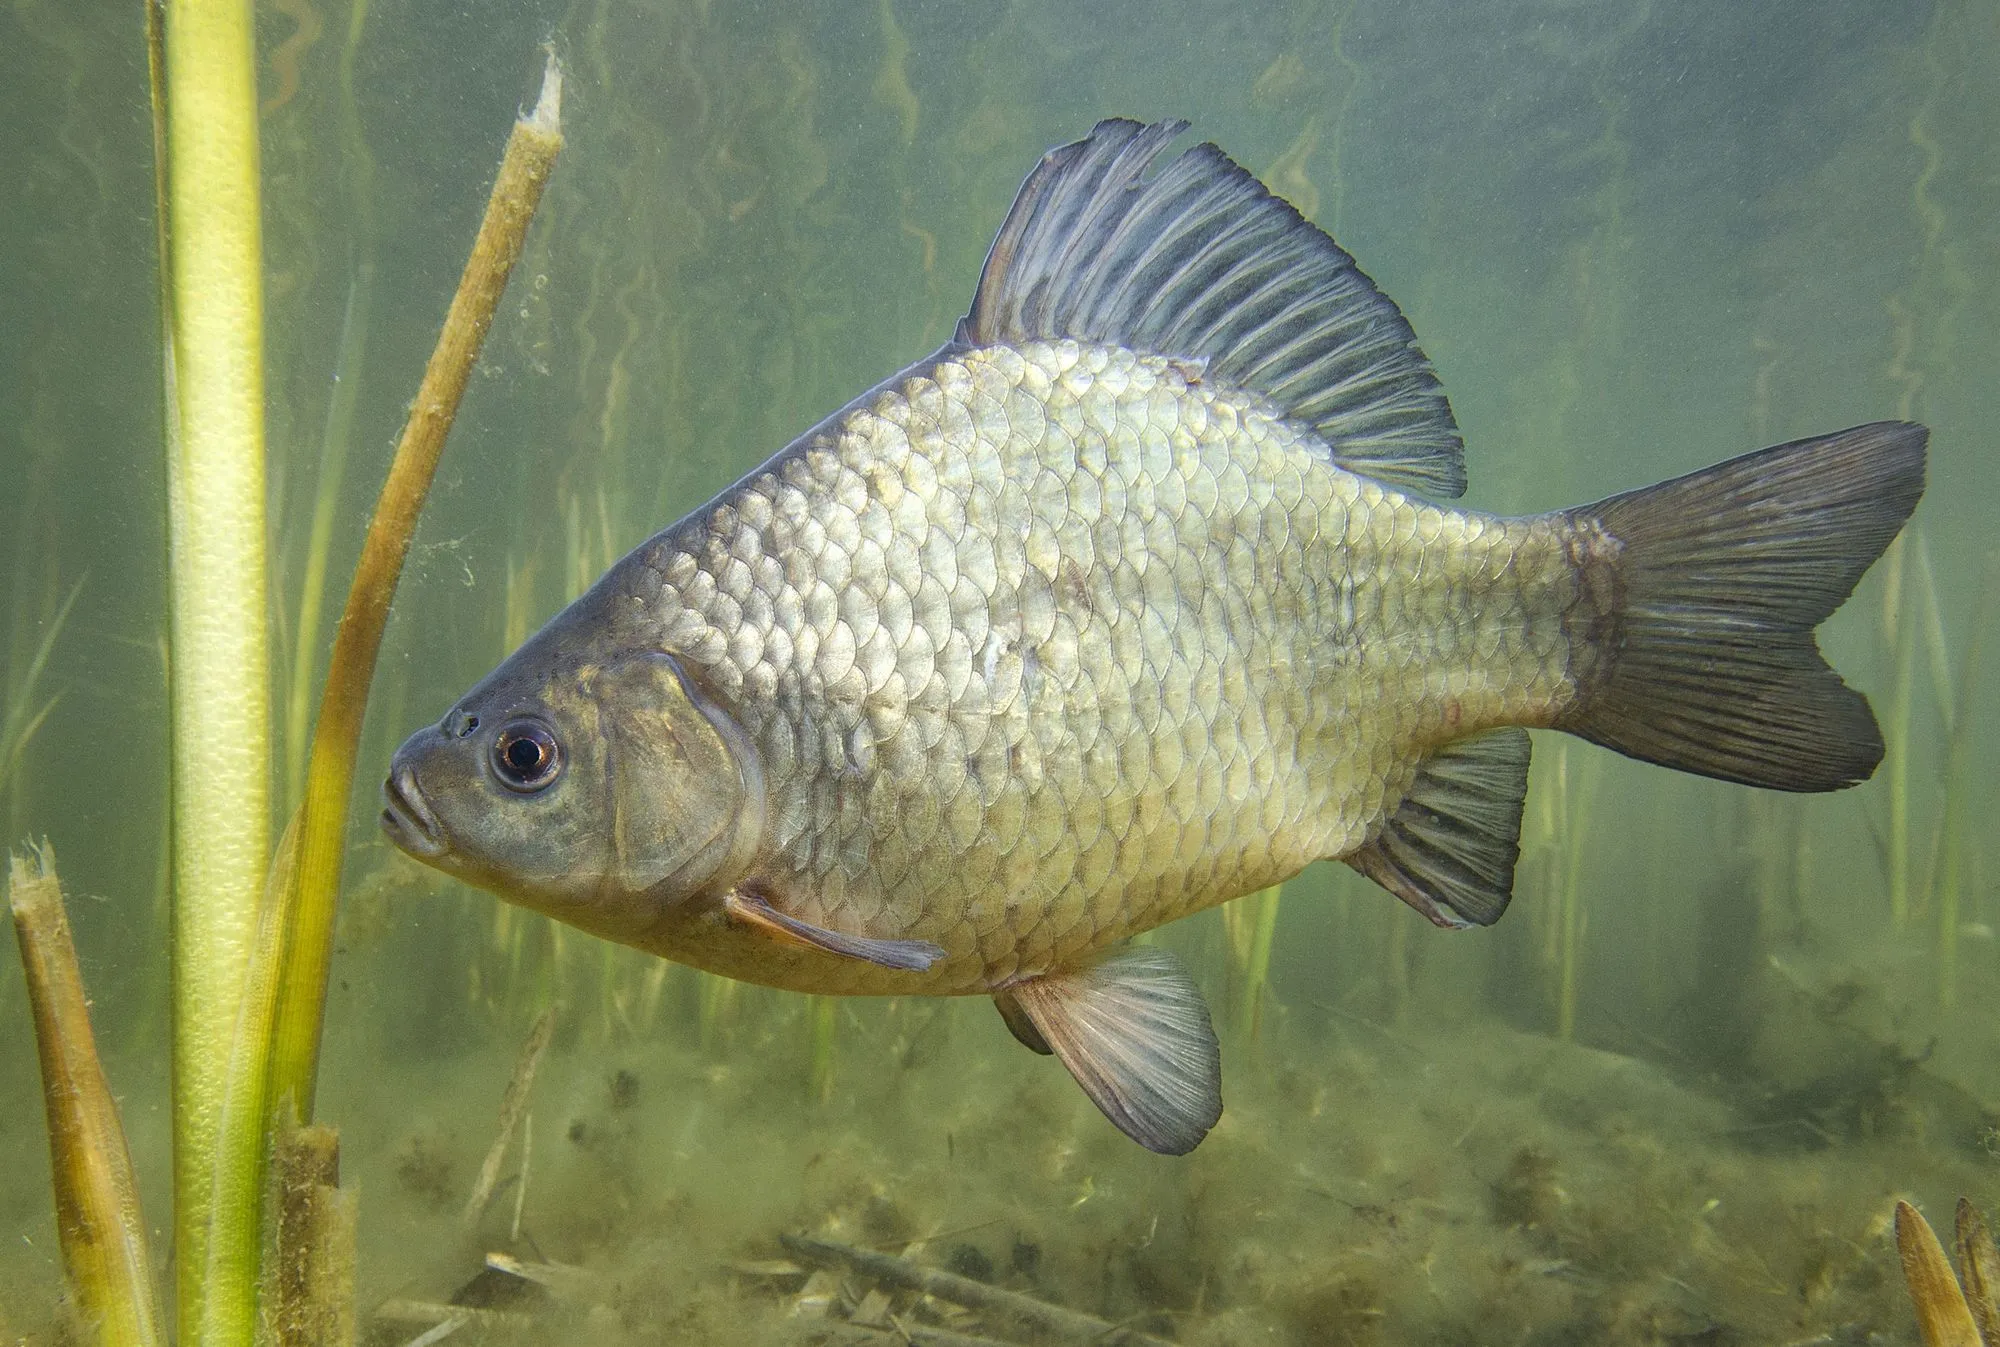 Crucian carp facts and info for kids are interesting!